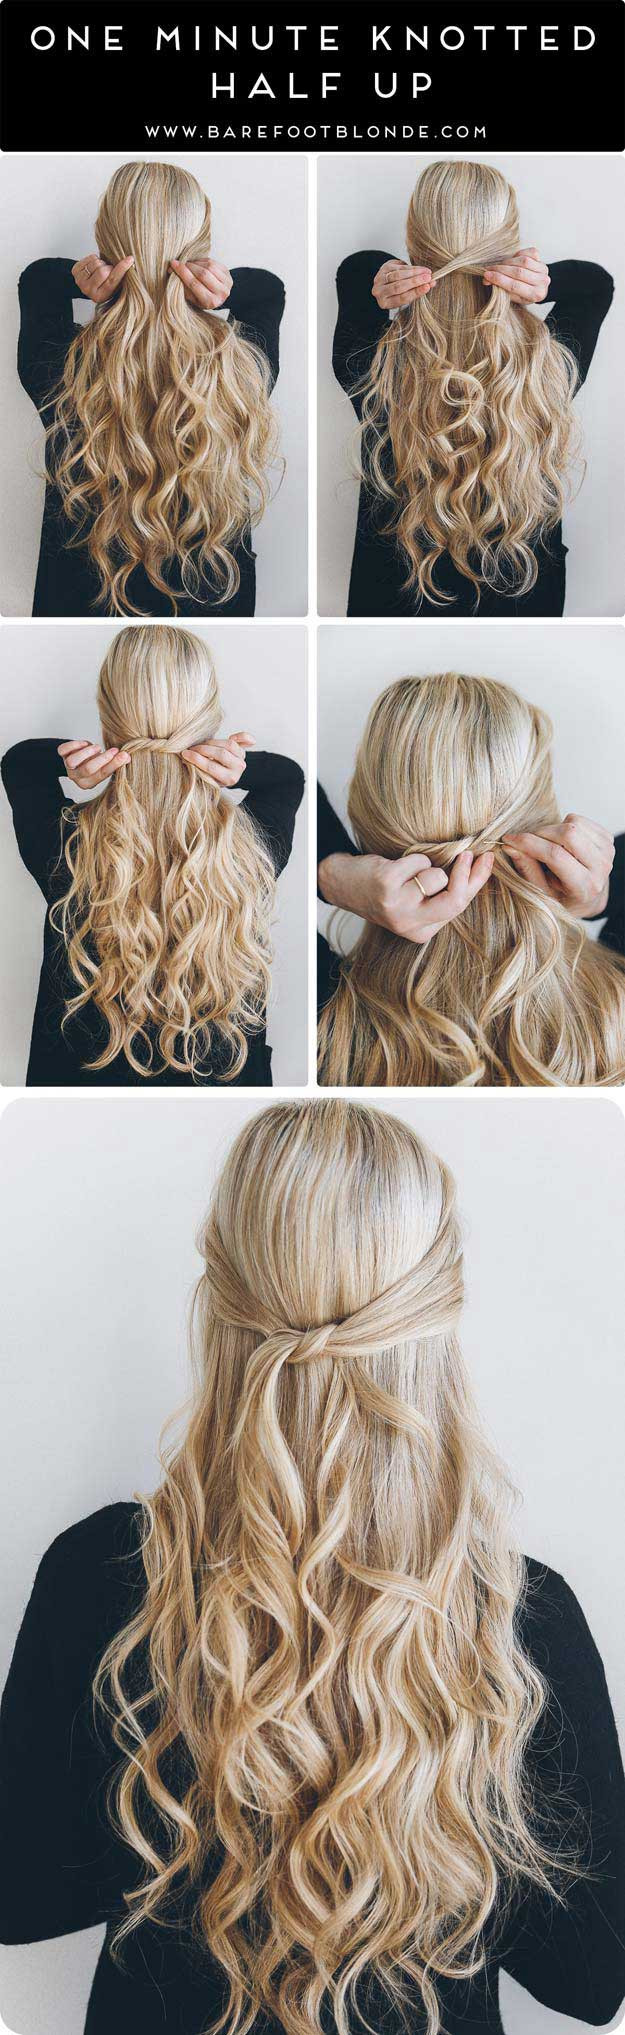 Cute Half Up Hairstyles
 31 Amazing Half up Half down Hairstyles For Long Hair